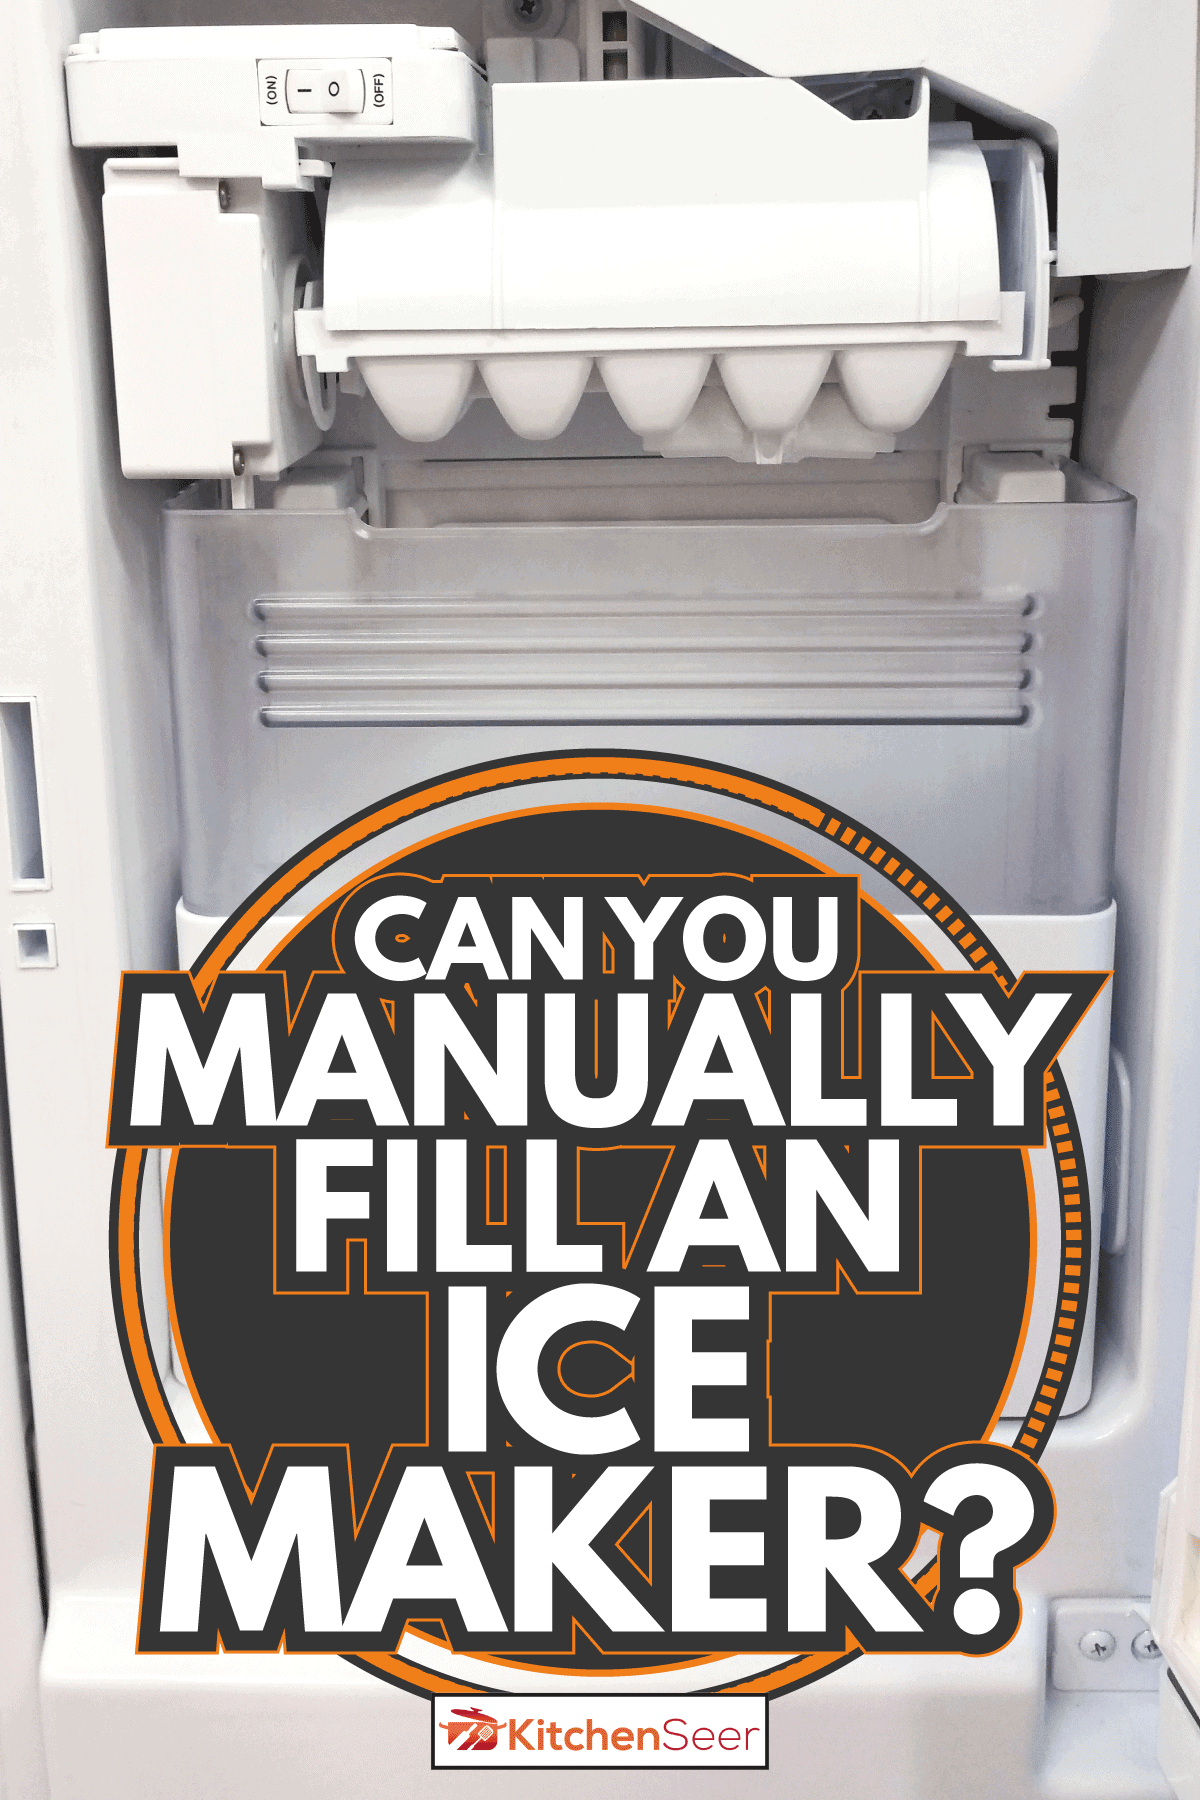 Refrigerator with a in door ice maker. Can You Manually Fill An Ice Maker